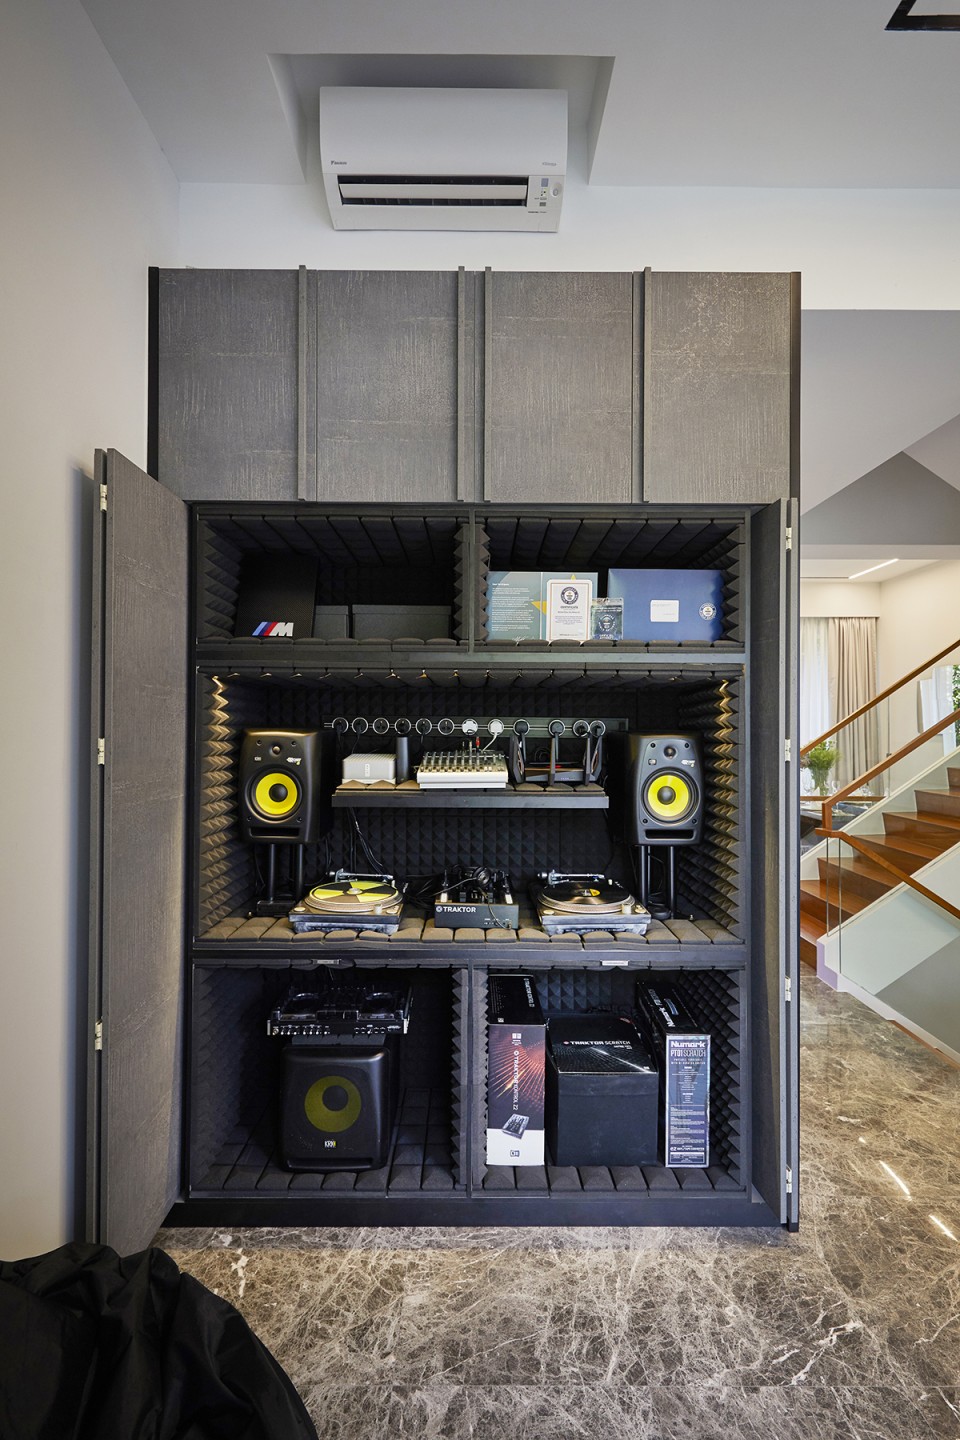 squarerooms i-chapter home design terraced house interior singapore luxury design dj booth black cupboard